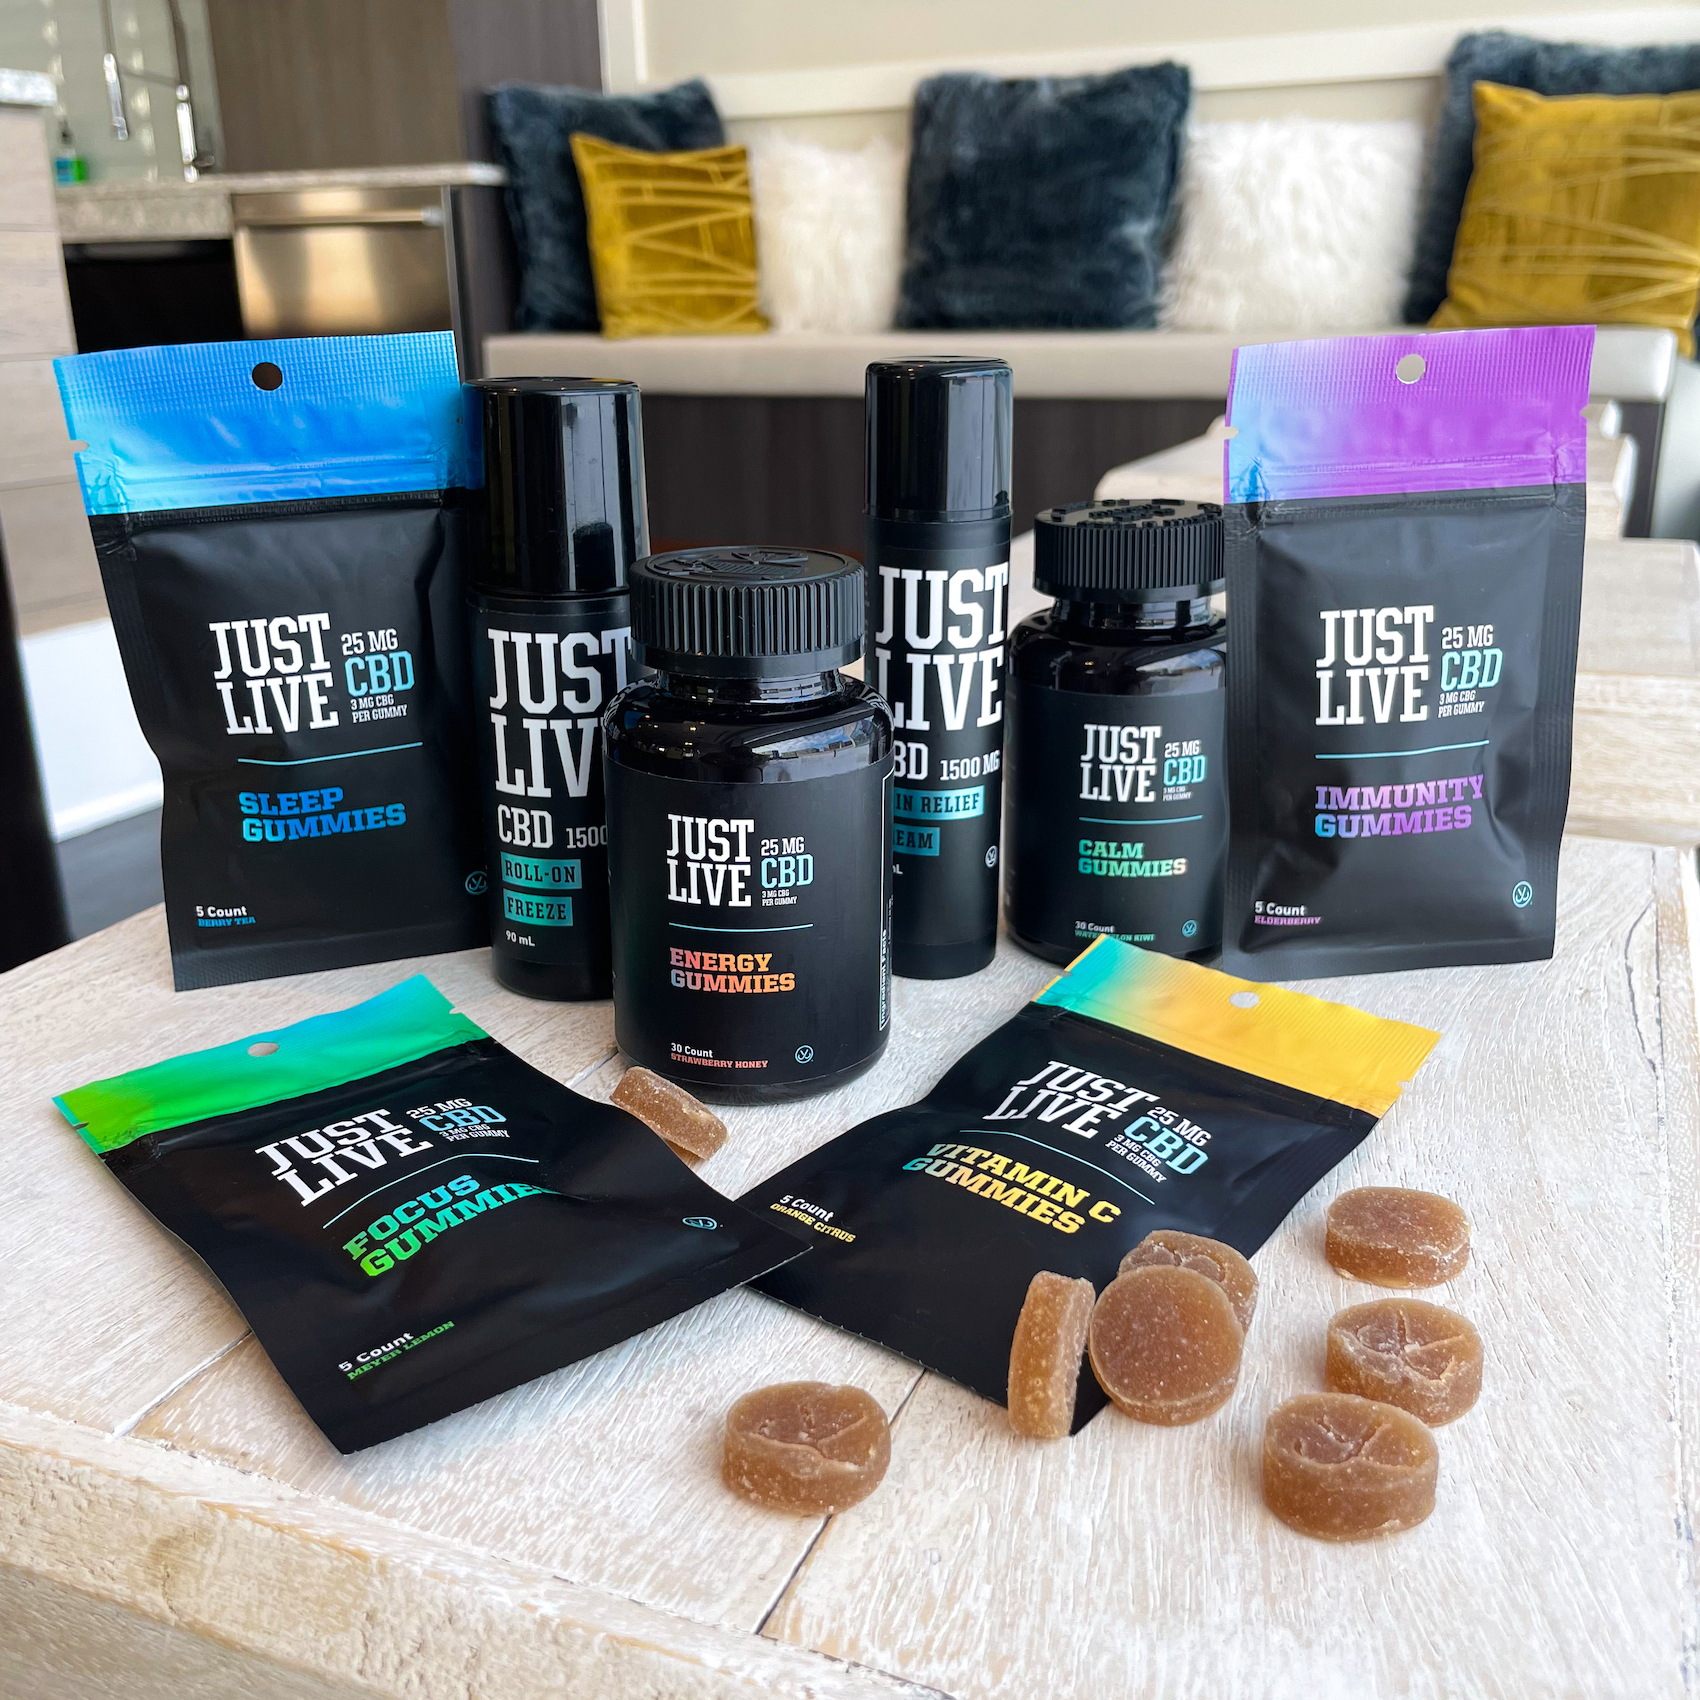 Just Live CBD products reviewed